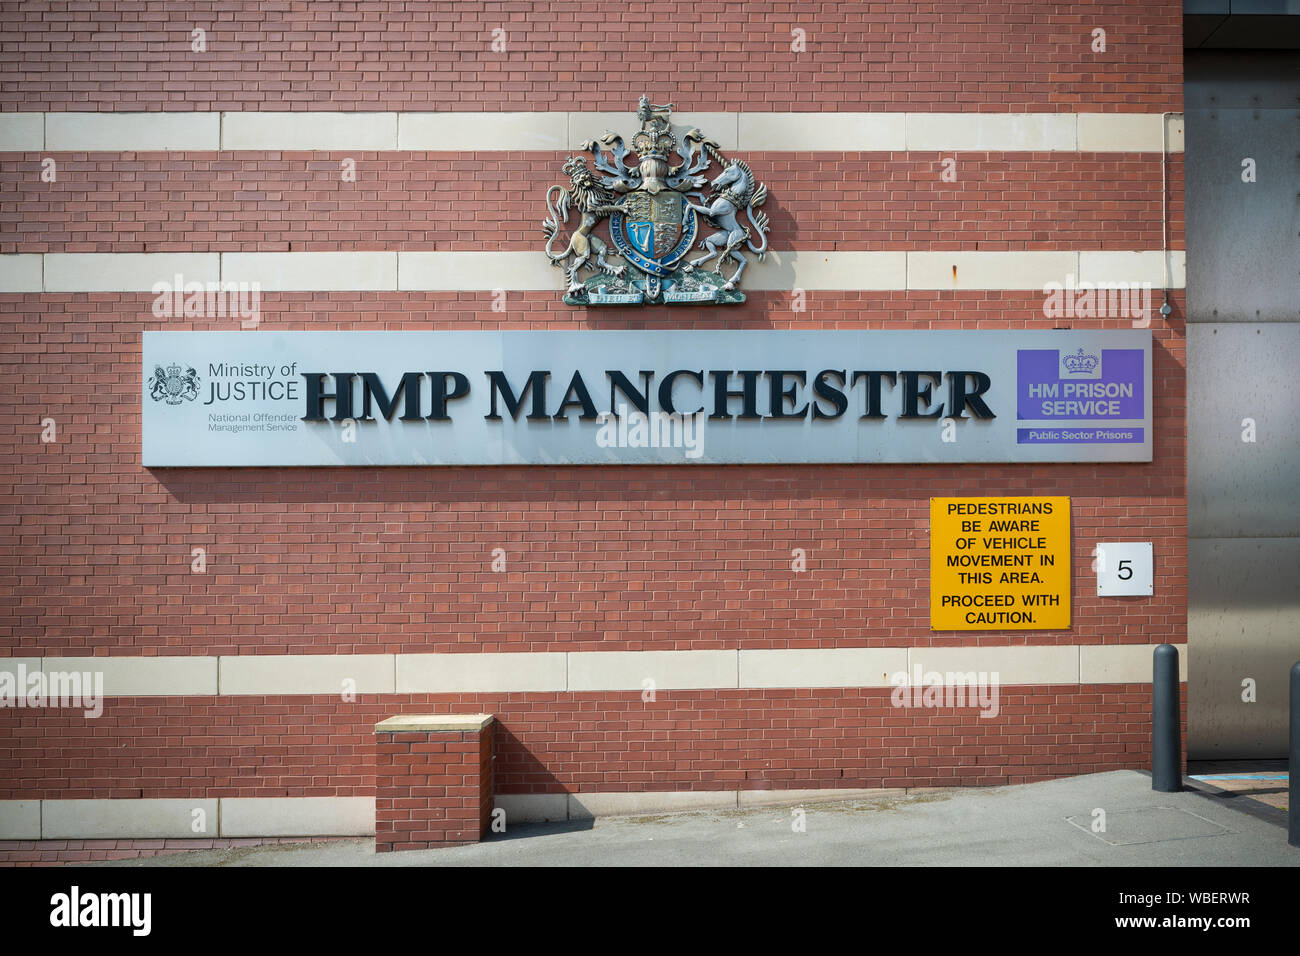 Signage for HMP Manchester (formerly Strangeways) high security prison in Manchester, UK. Stock Photo